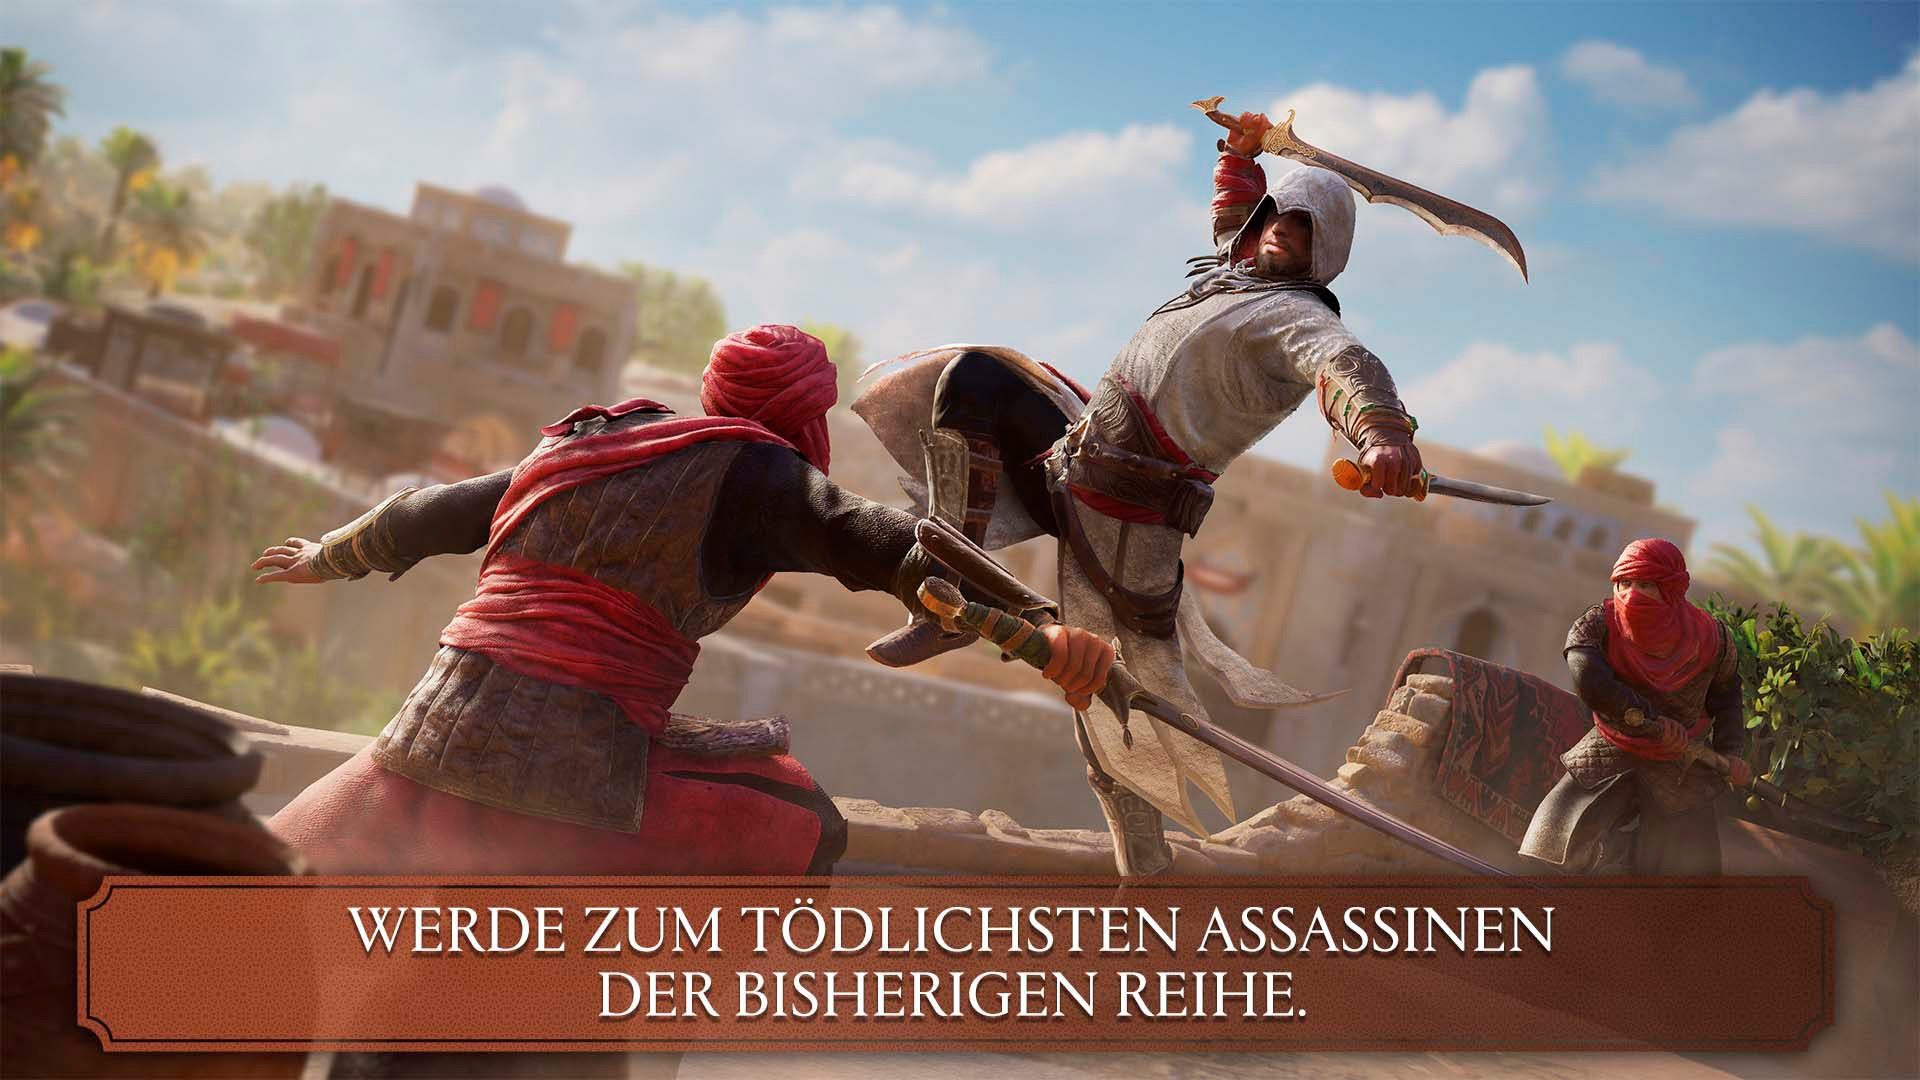 Assassin's - PS5) UBISOFT Deluxe Mirage Upgrade Creed Edition (kostenloses auf 4 PlayStation